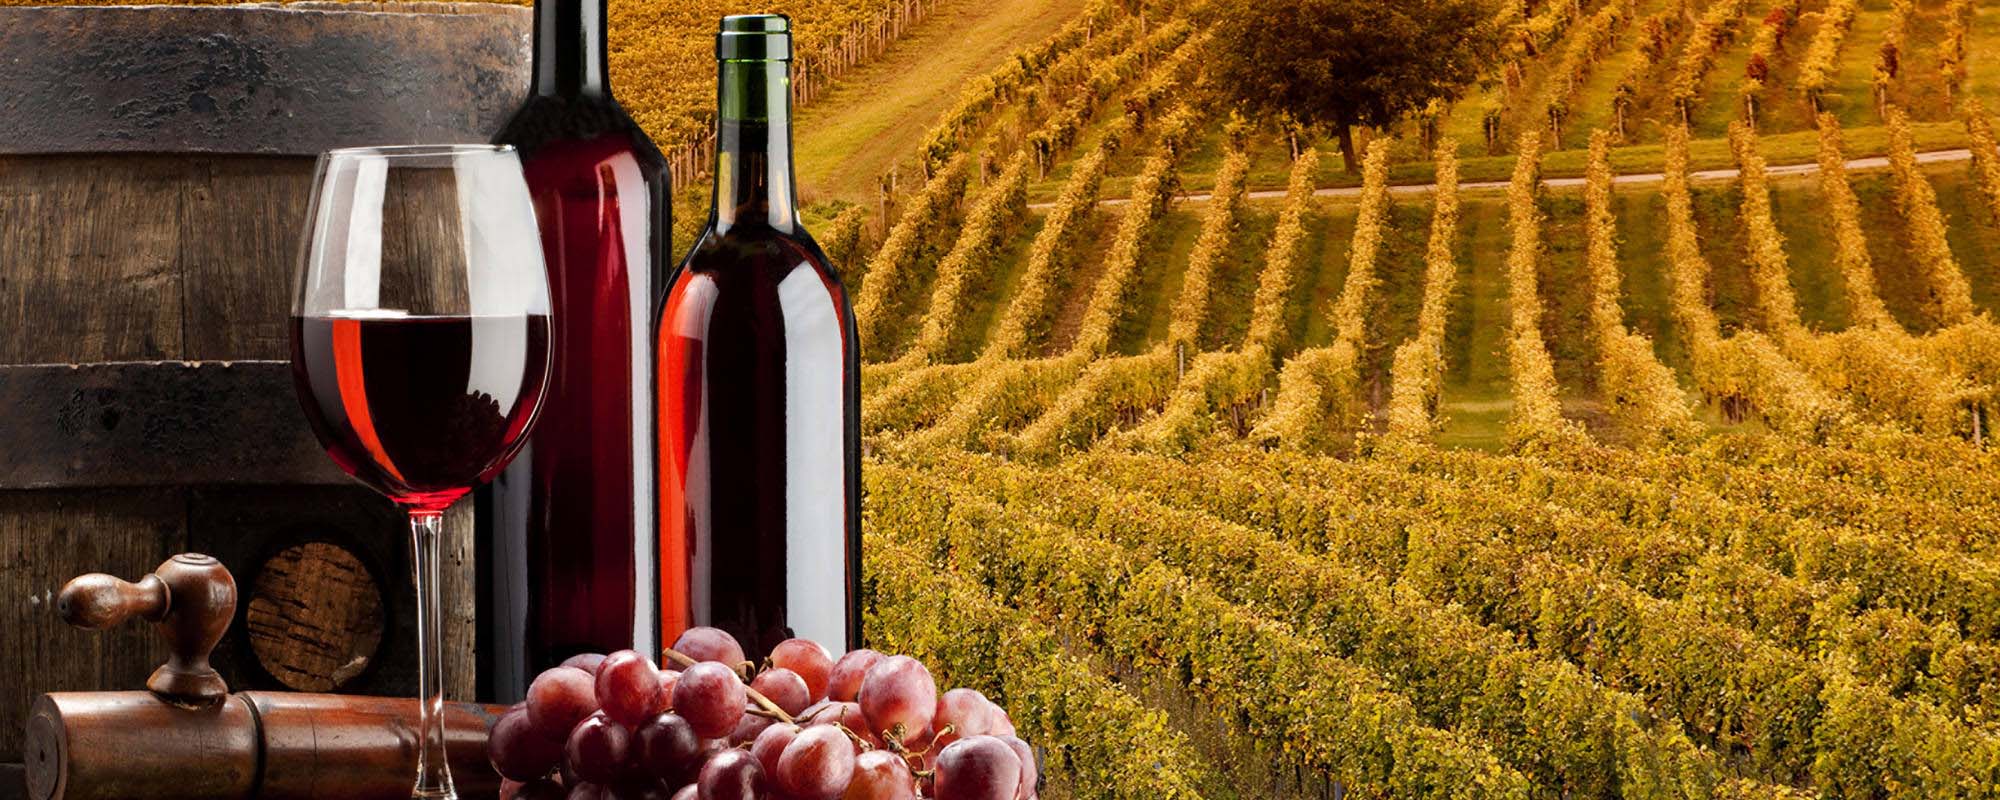 Wine bottles, wine glass, and grapes beside a field 